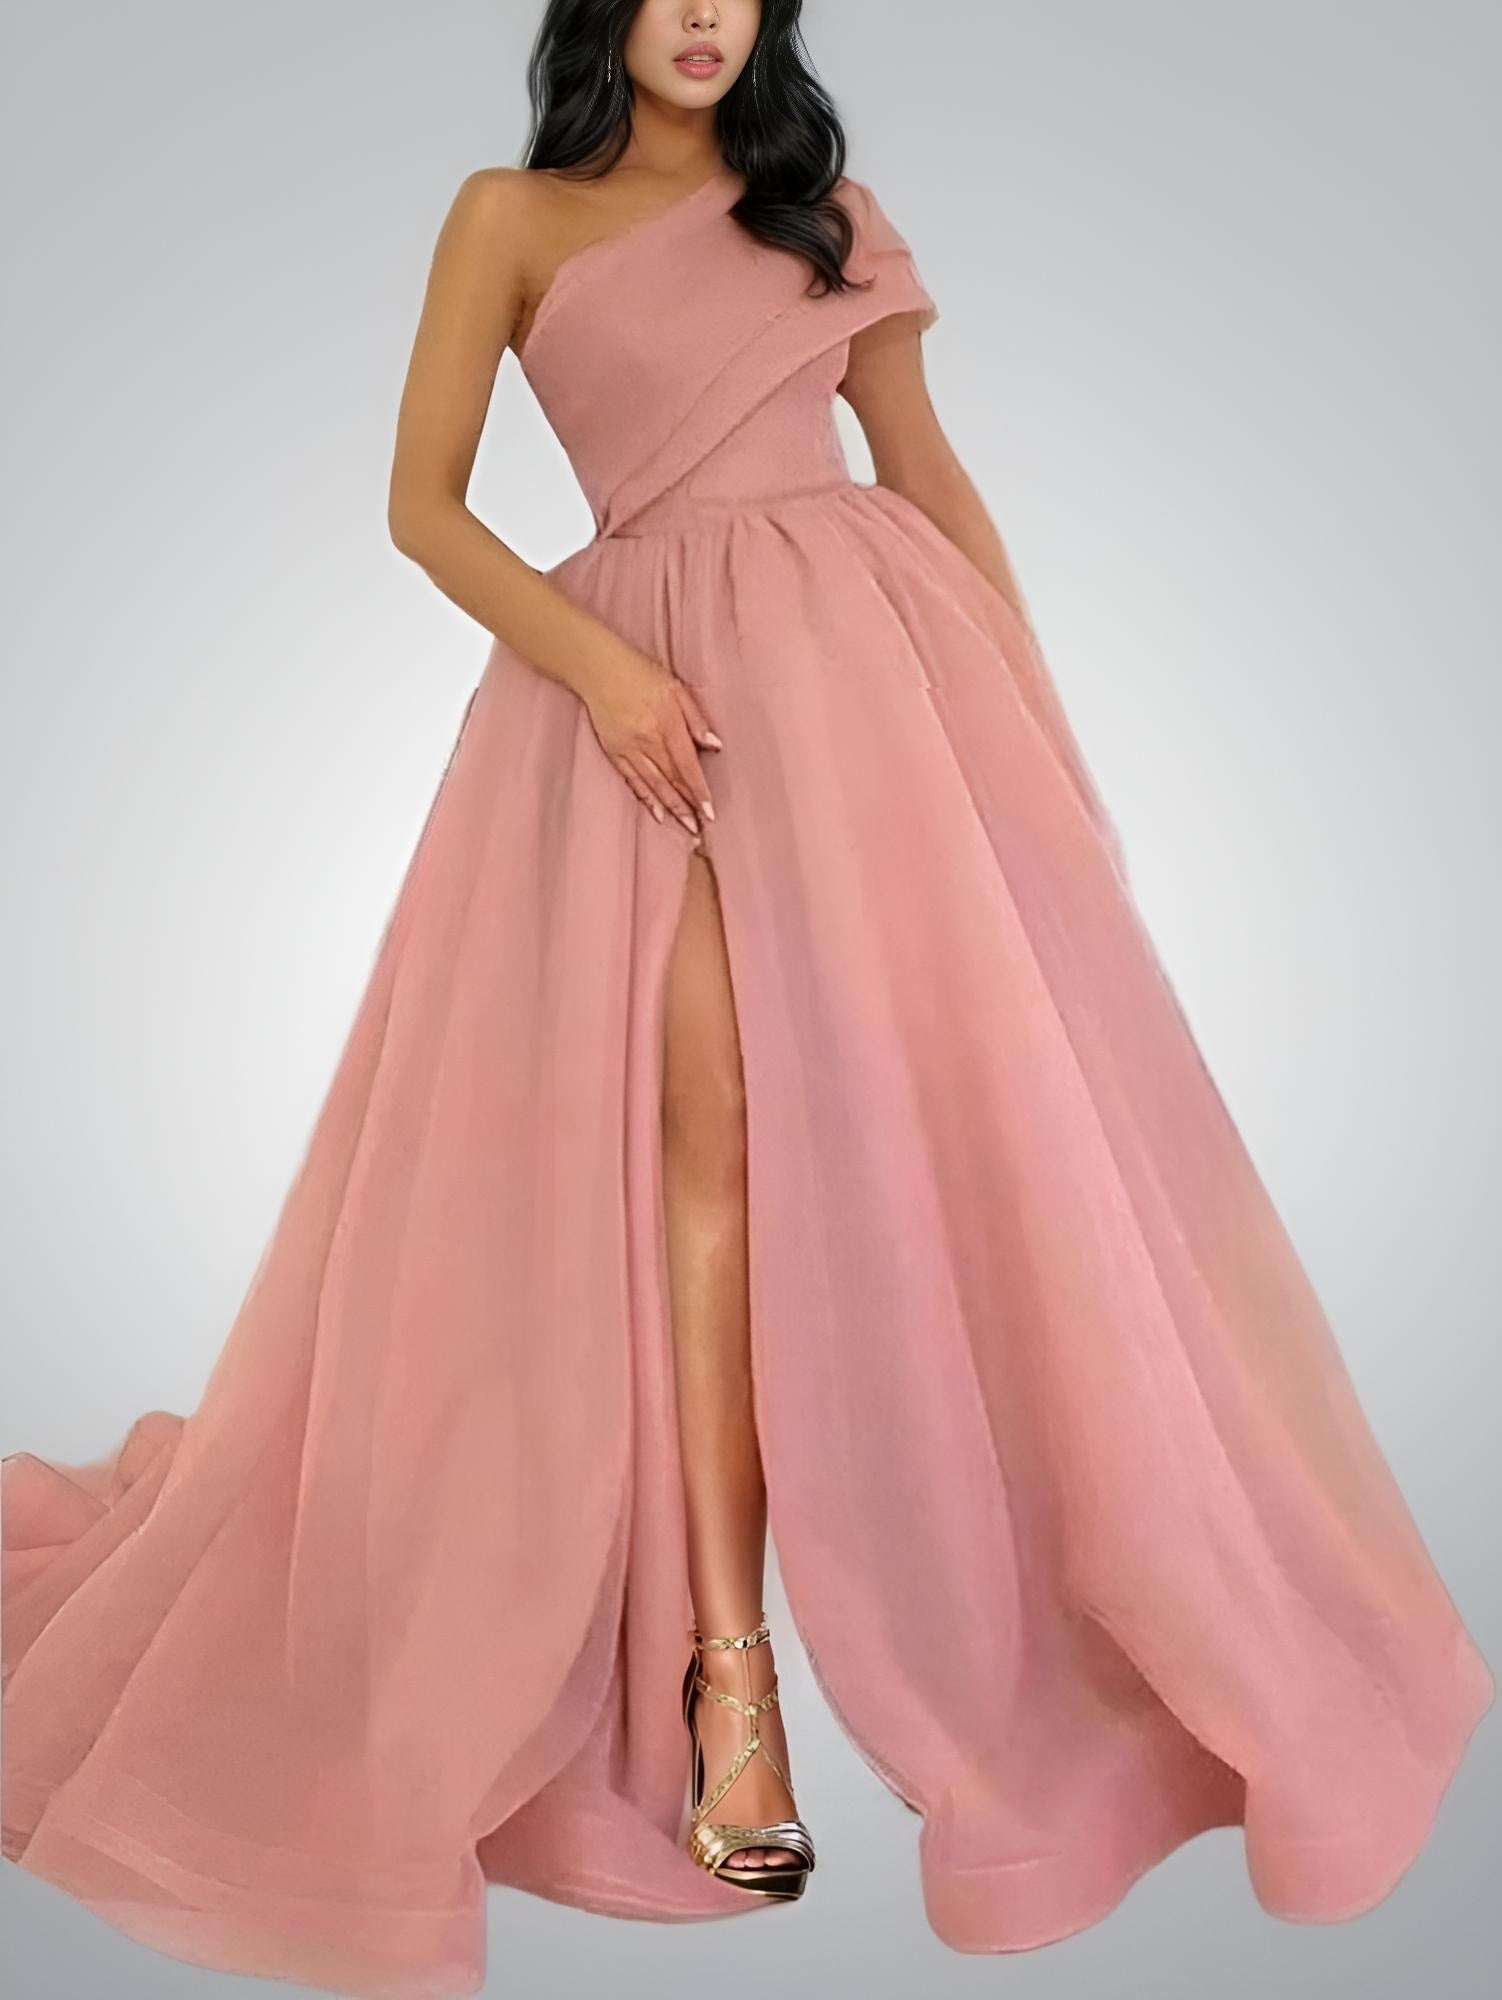 Lady in Dusty Pink Alice Prom Dress with A-Line Silhouette and High Slit